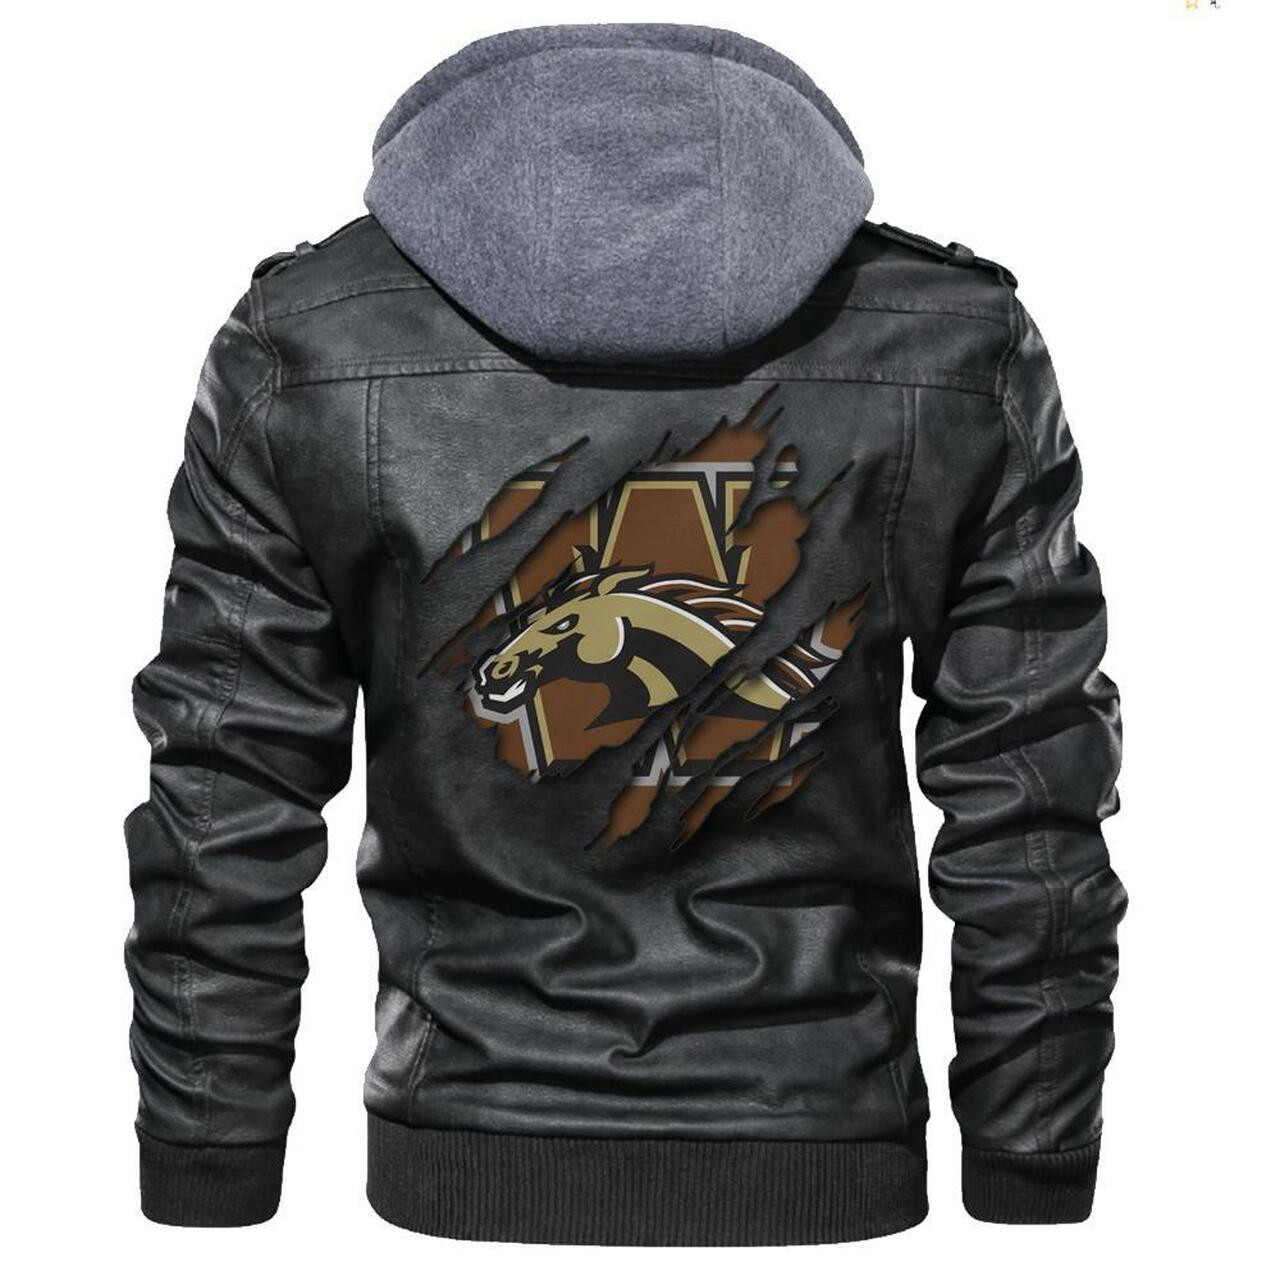 Check out our collection of the latest and greatest leather jacket 236